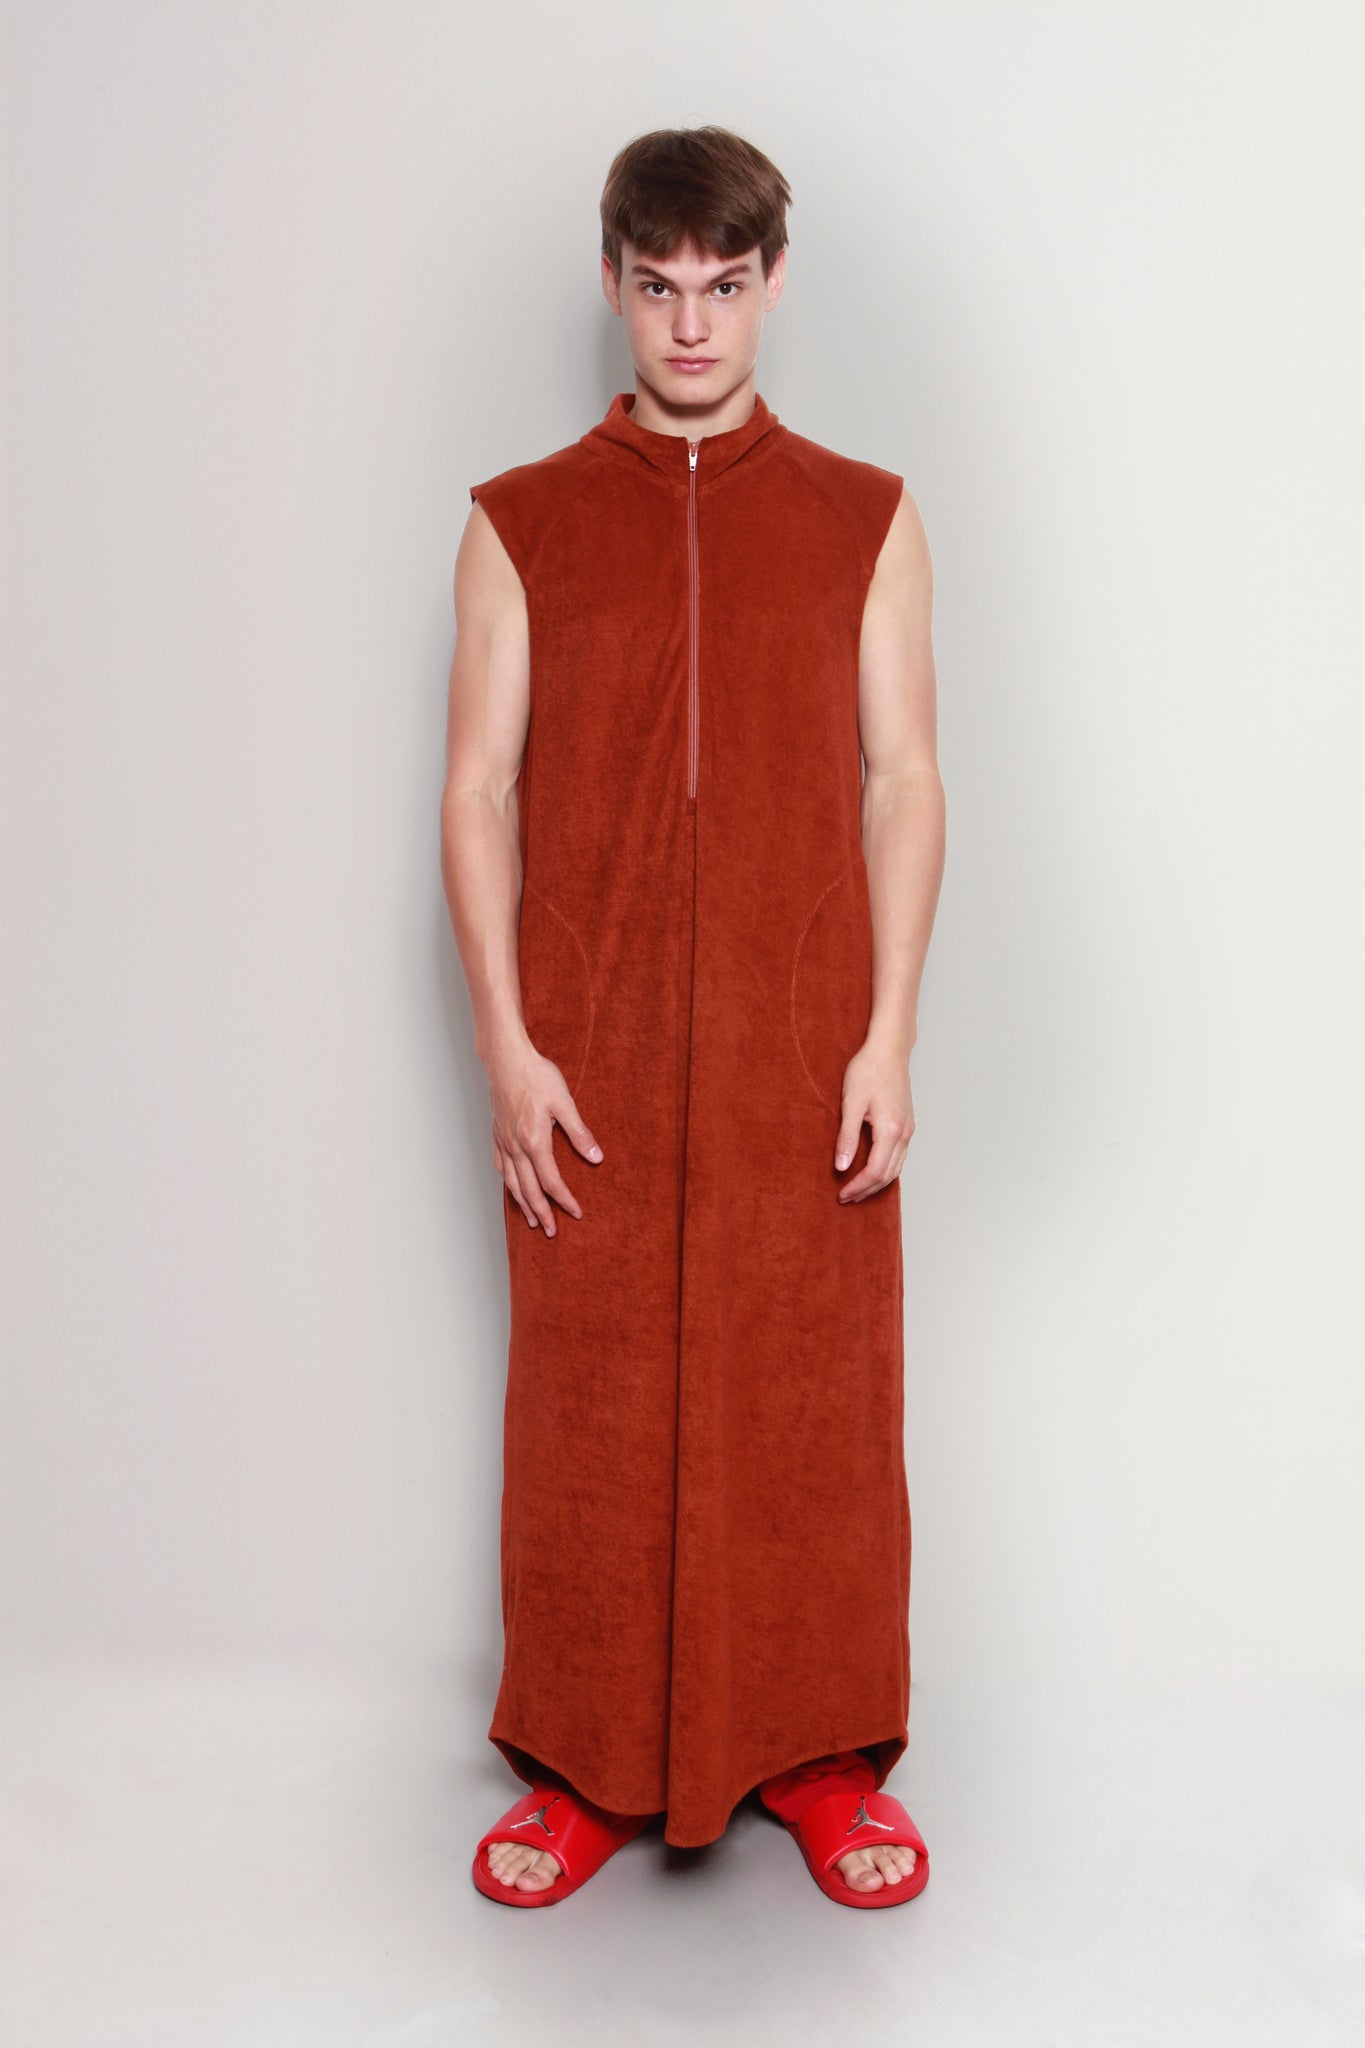 Kaftan Liberall. Style: Donnie - unisex, no sleeve, brown. Photo by Eva Roefs.